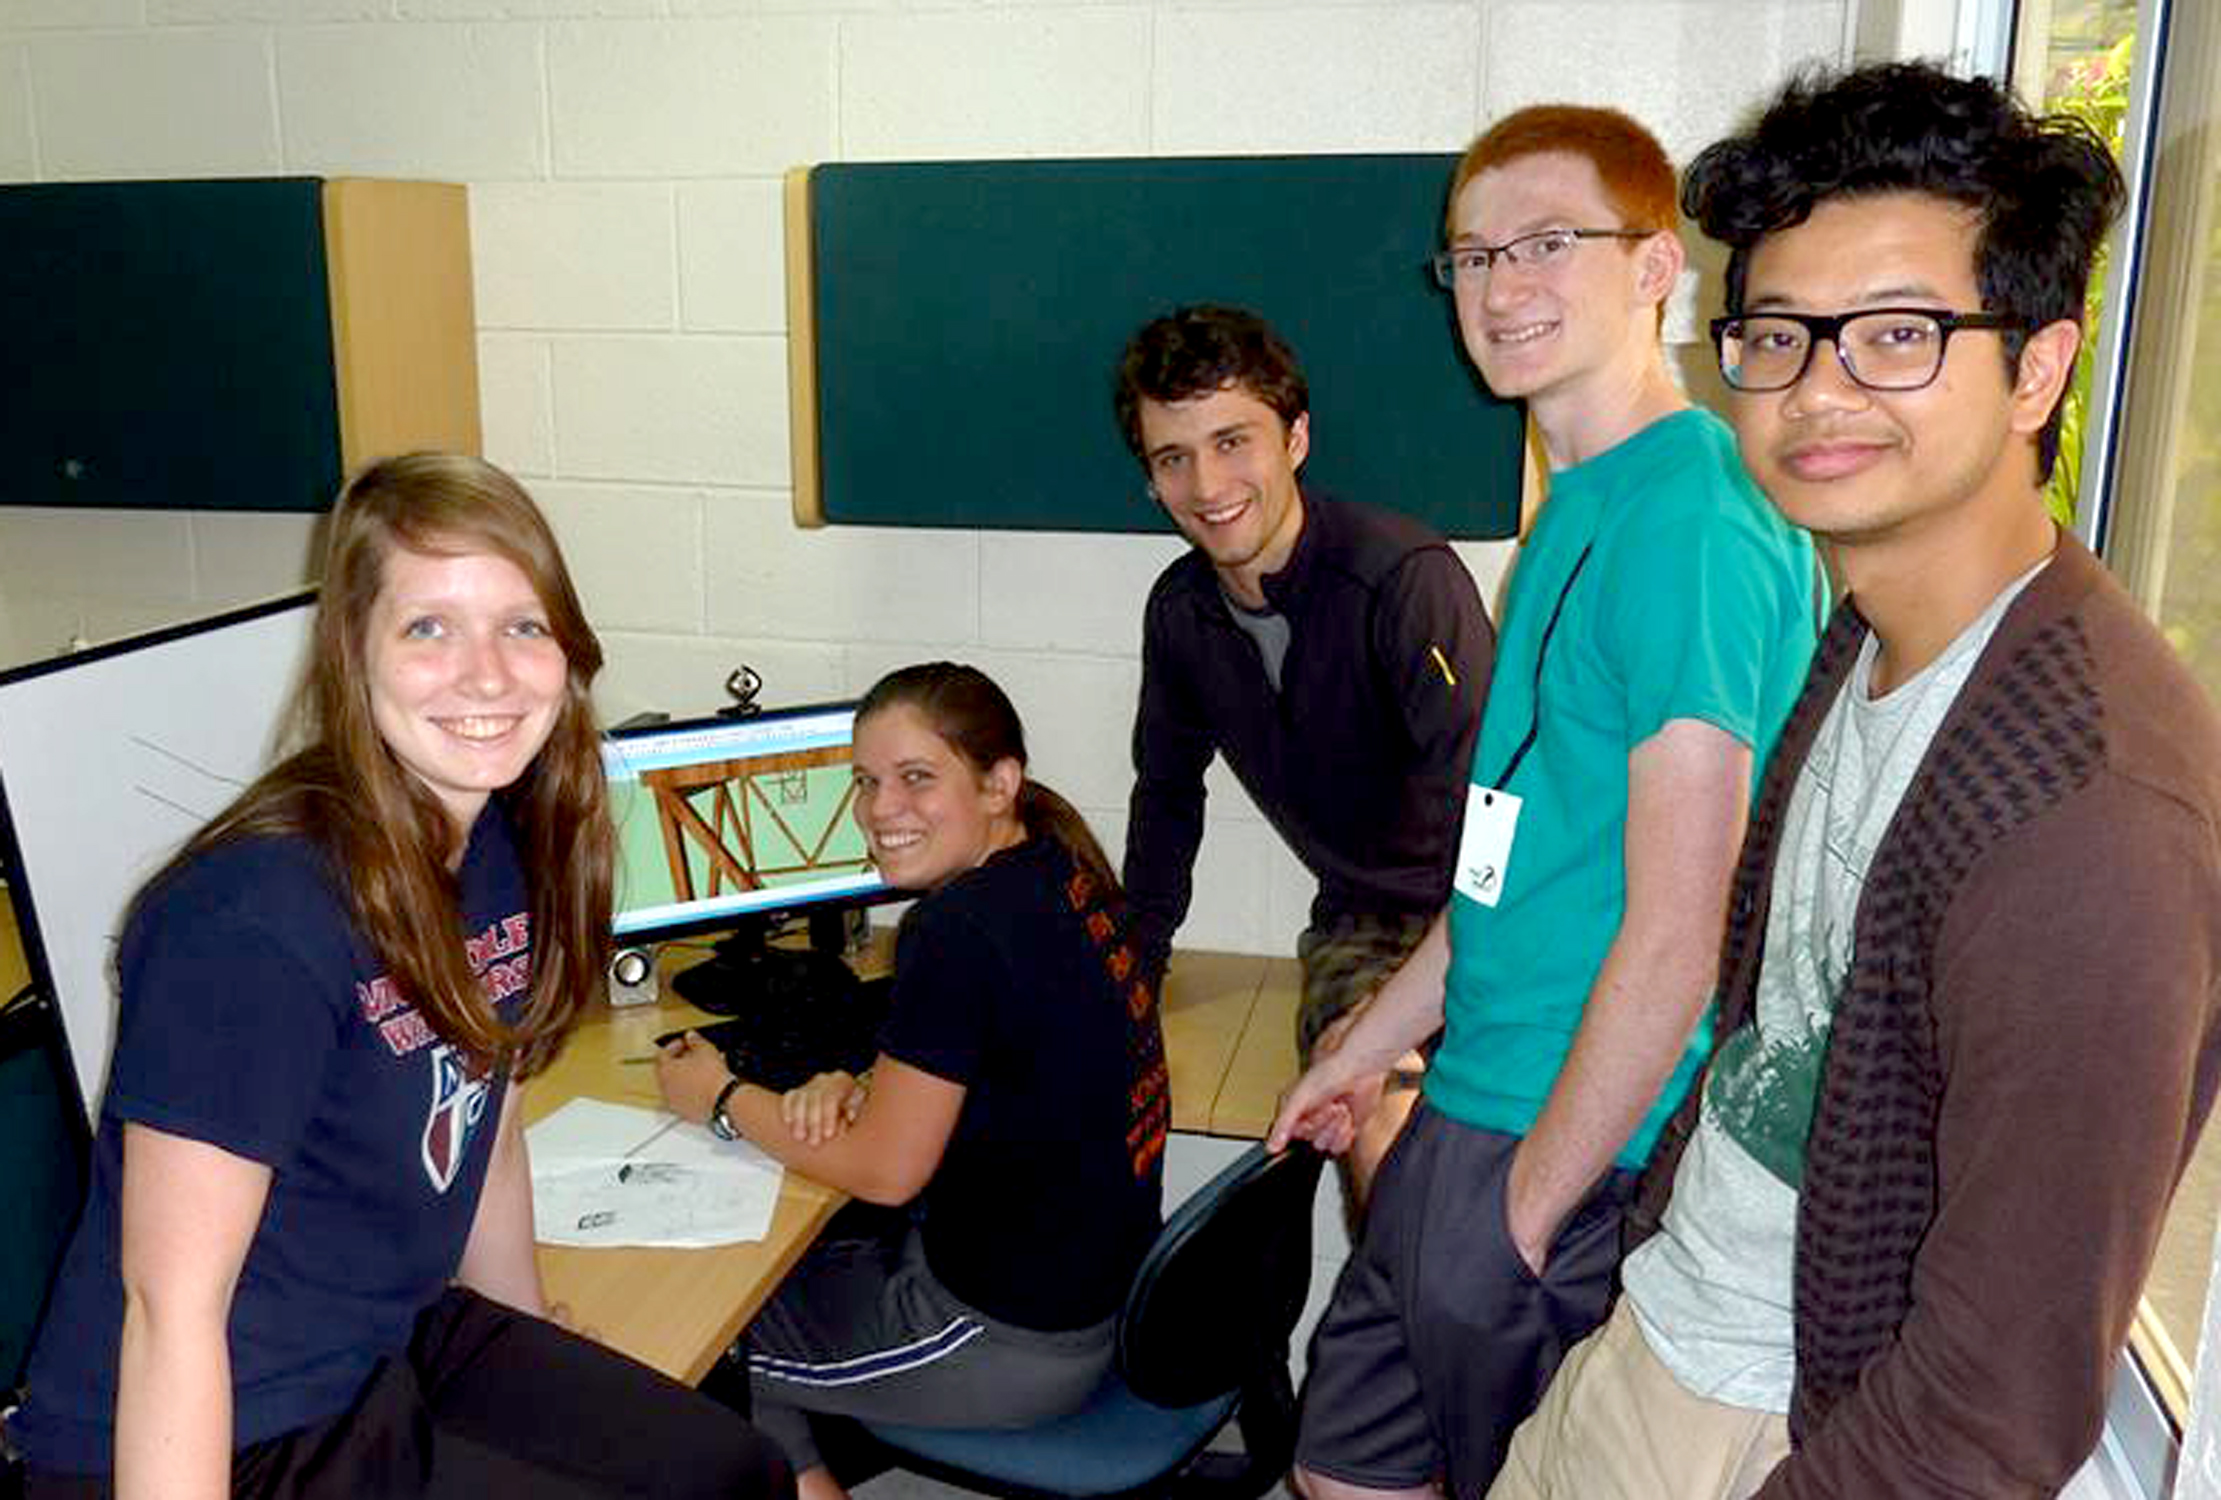 L-R: Summer interns Rachel Kunker, Jacque Zook, John, Tim Wolfe and Jerome Navarro. Not pictured: Connor Johnson